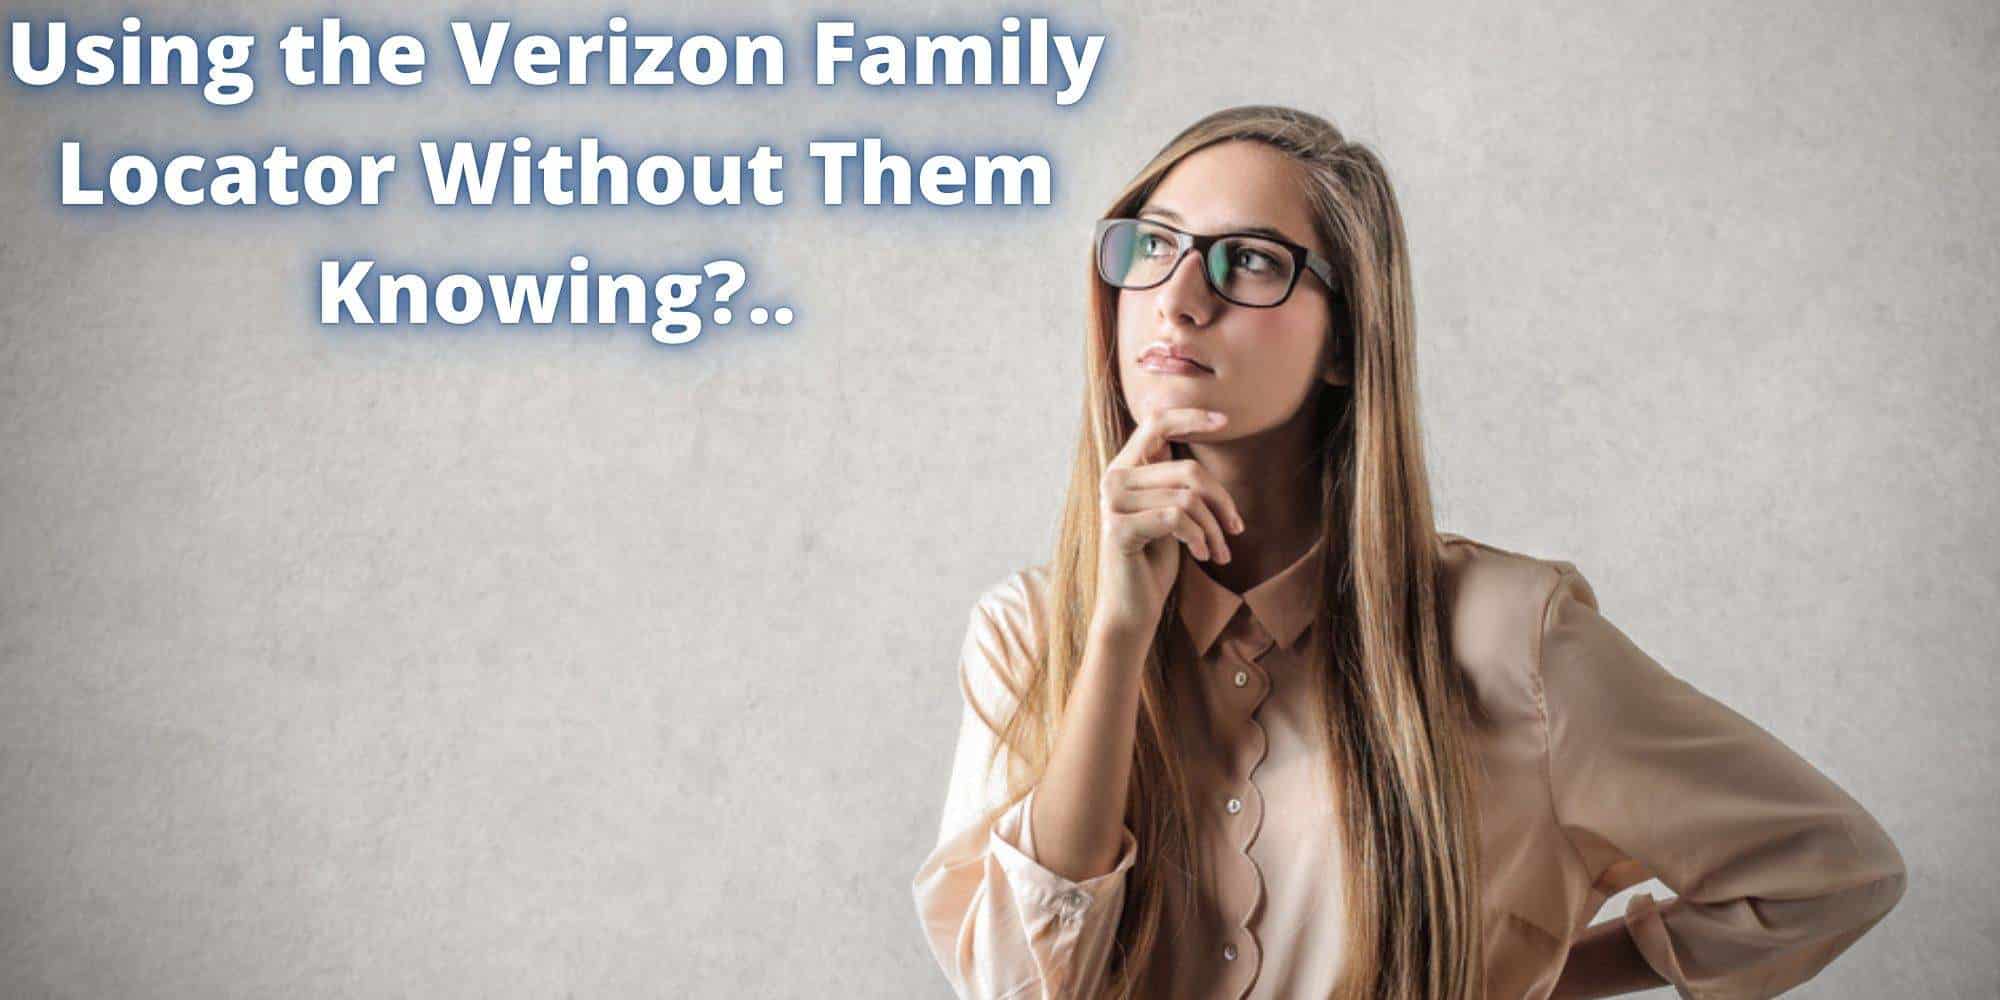 Using the Verizon Family Locator Without Them Knowing